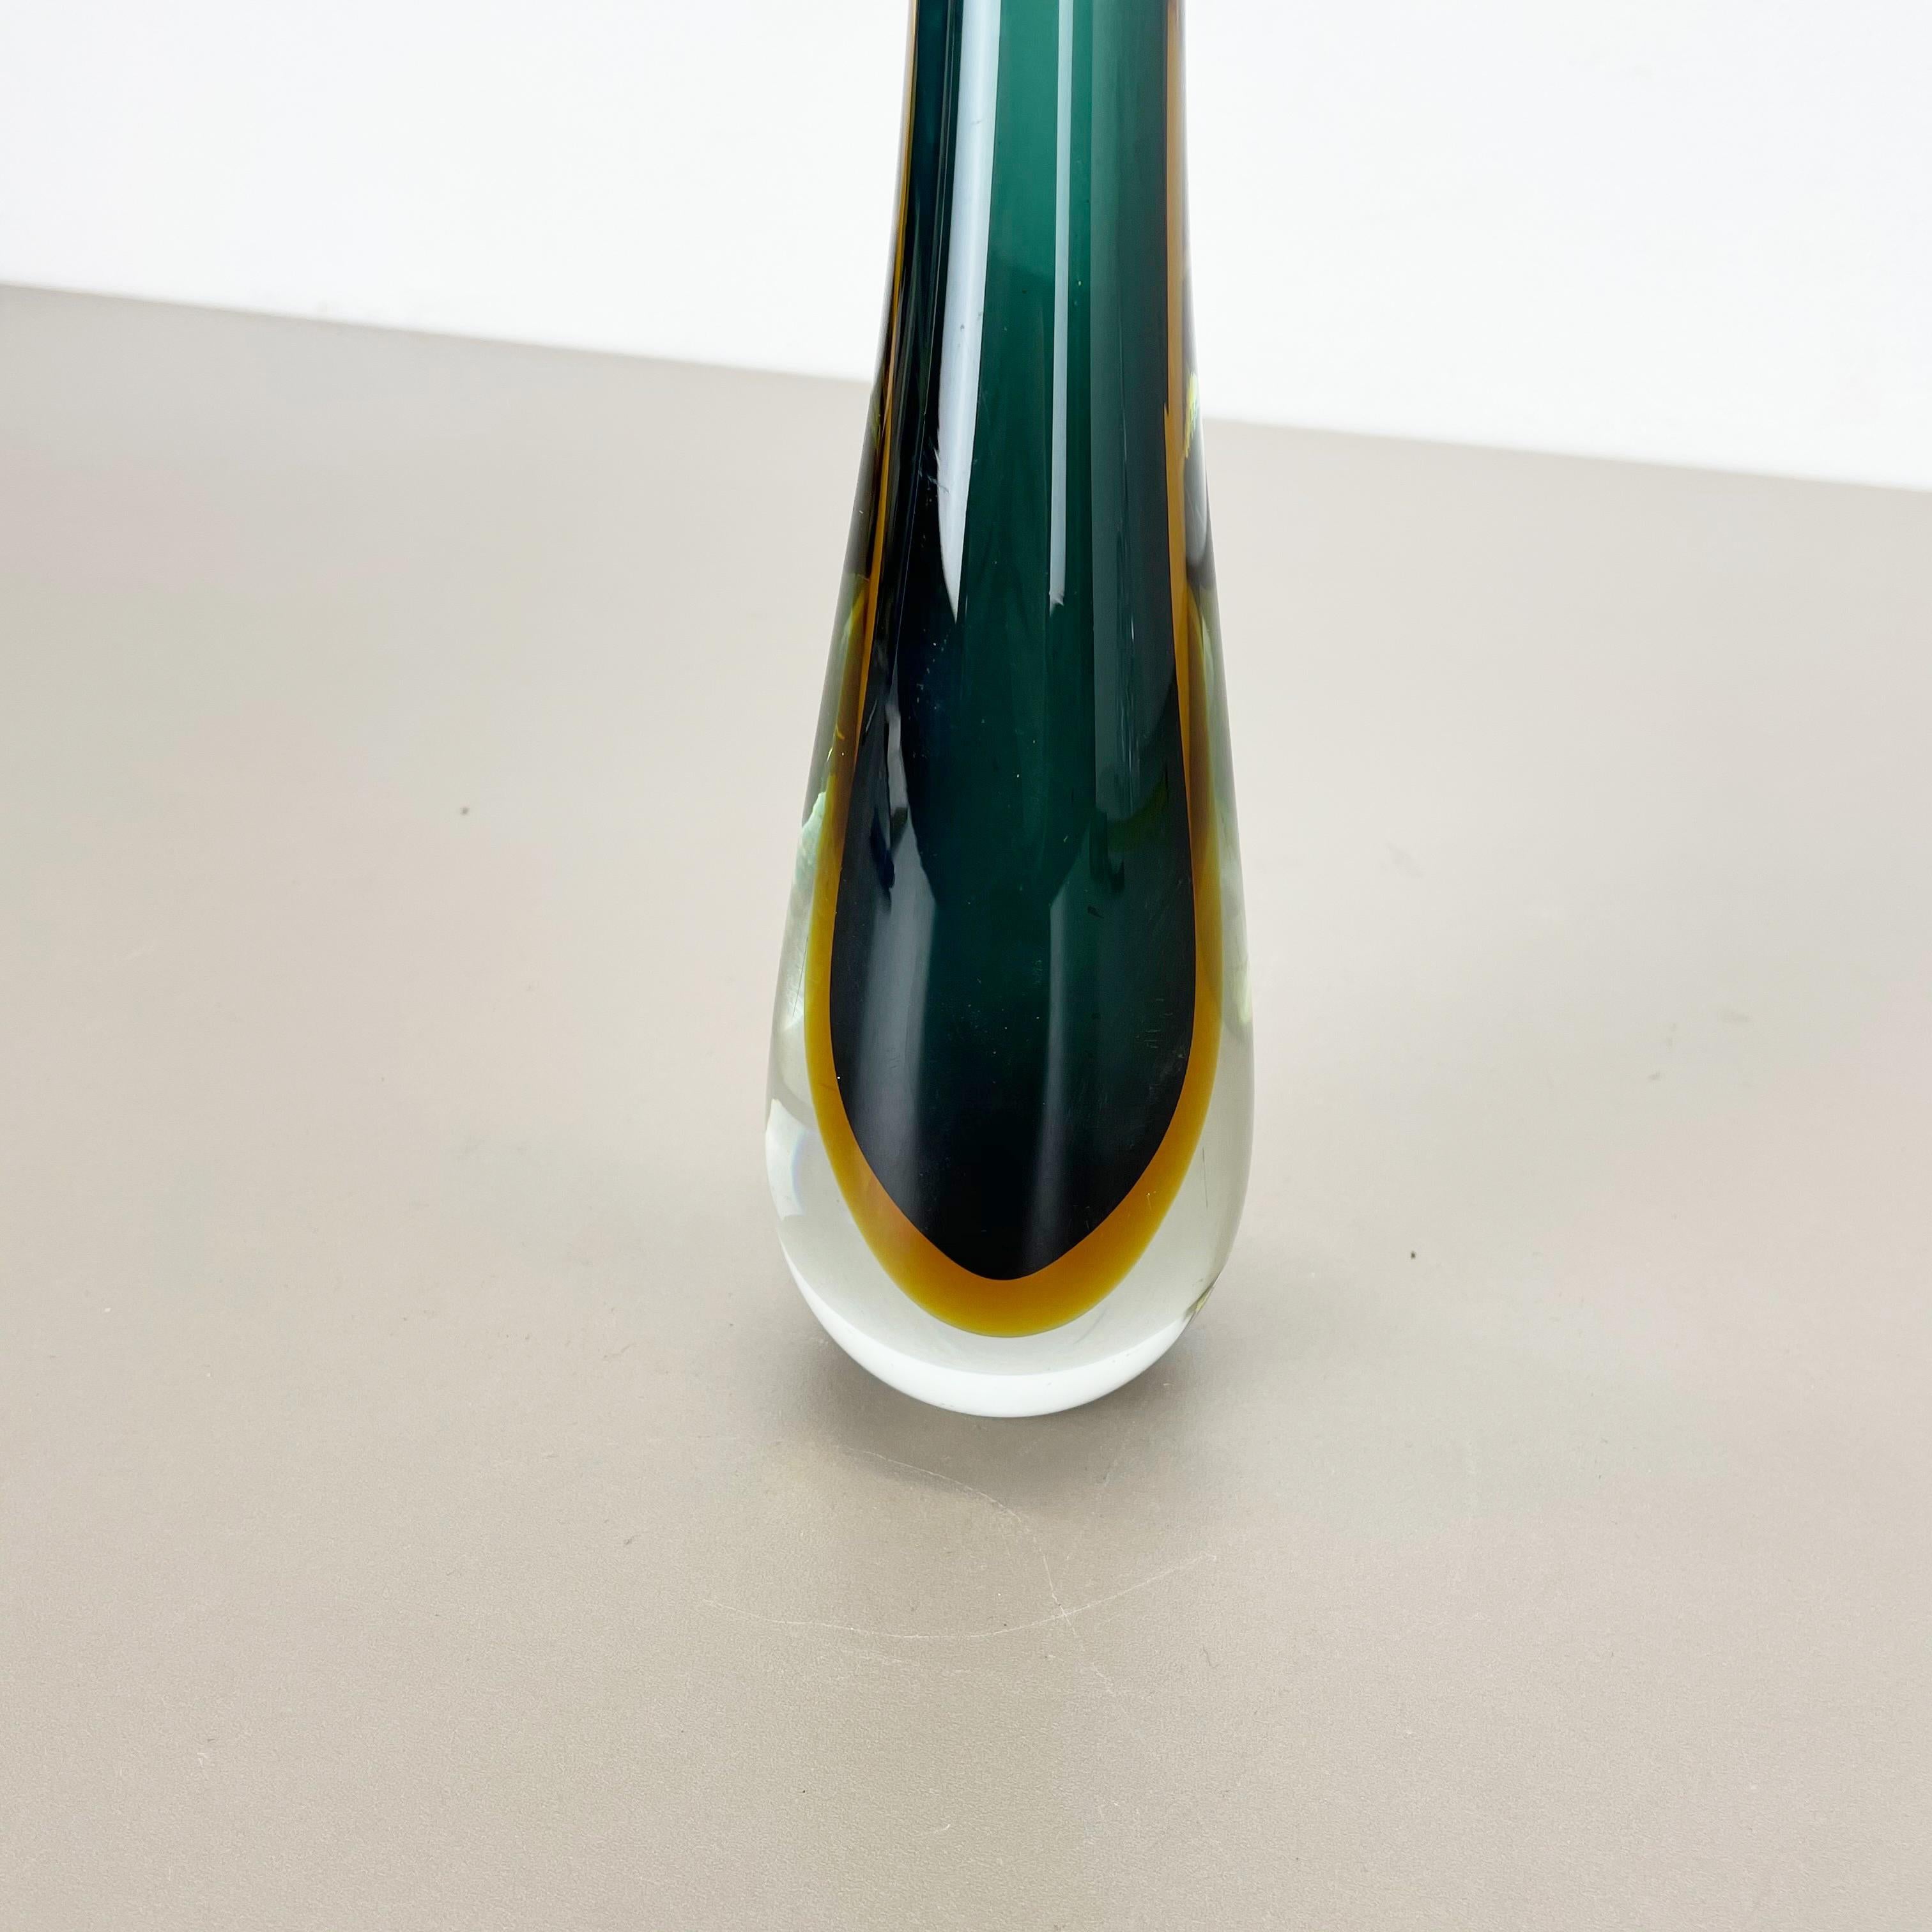 Large Murano Glass Sommerso Vase Designed by Flavio Poli Attributed Italy 1970s For Sale 4